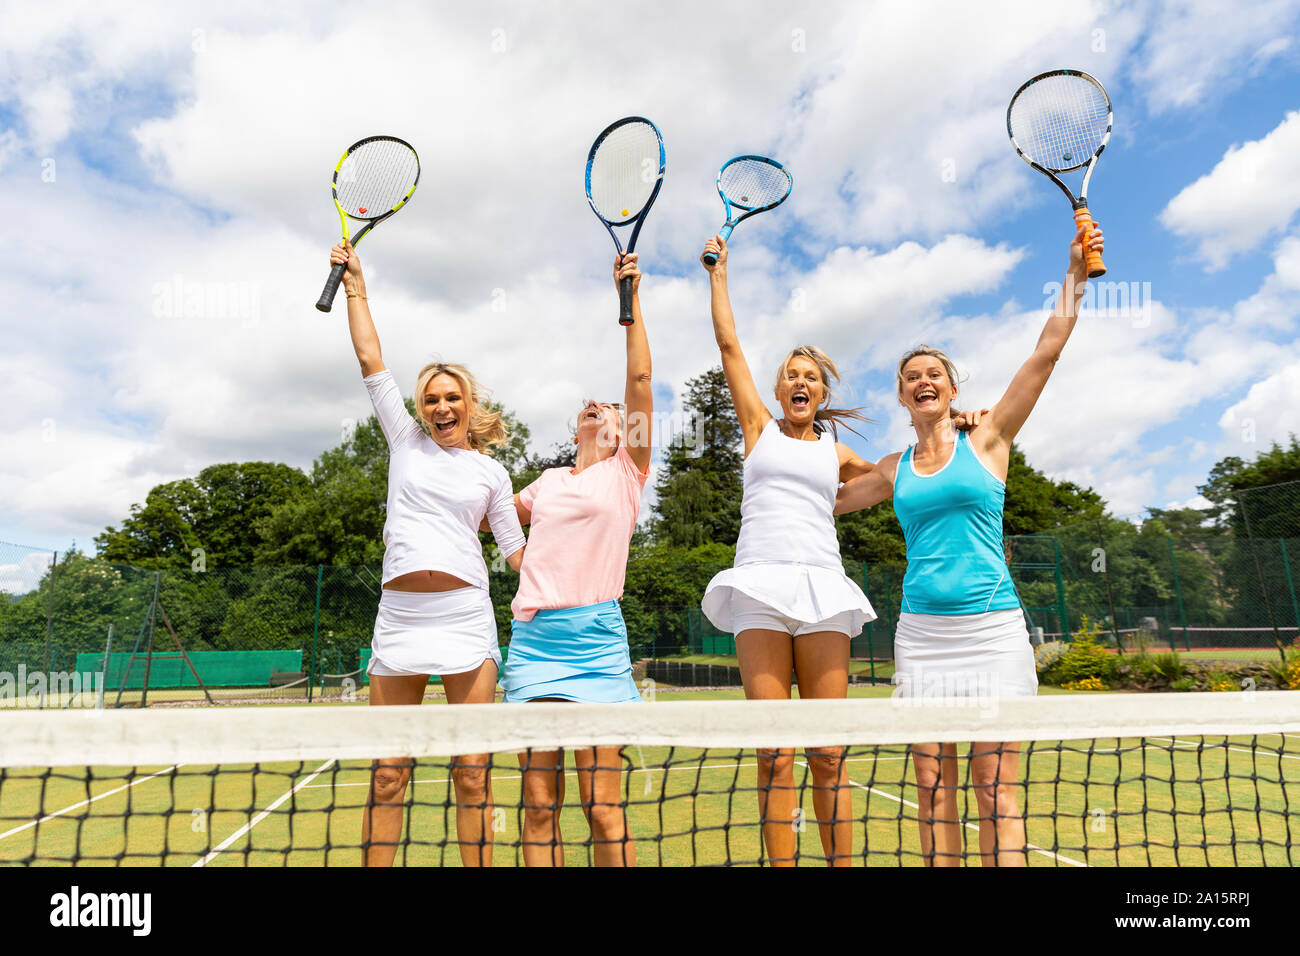 Happy female tennis players celebrating the victory on grass court Stock Photo